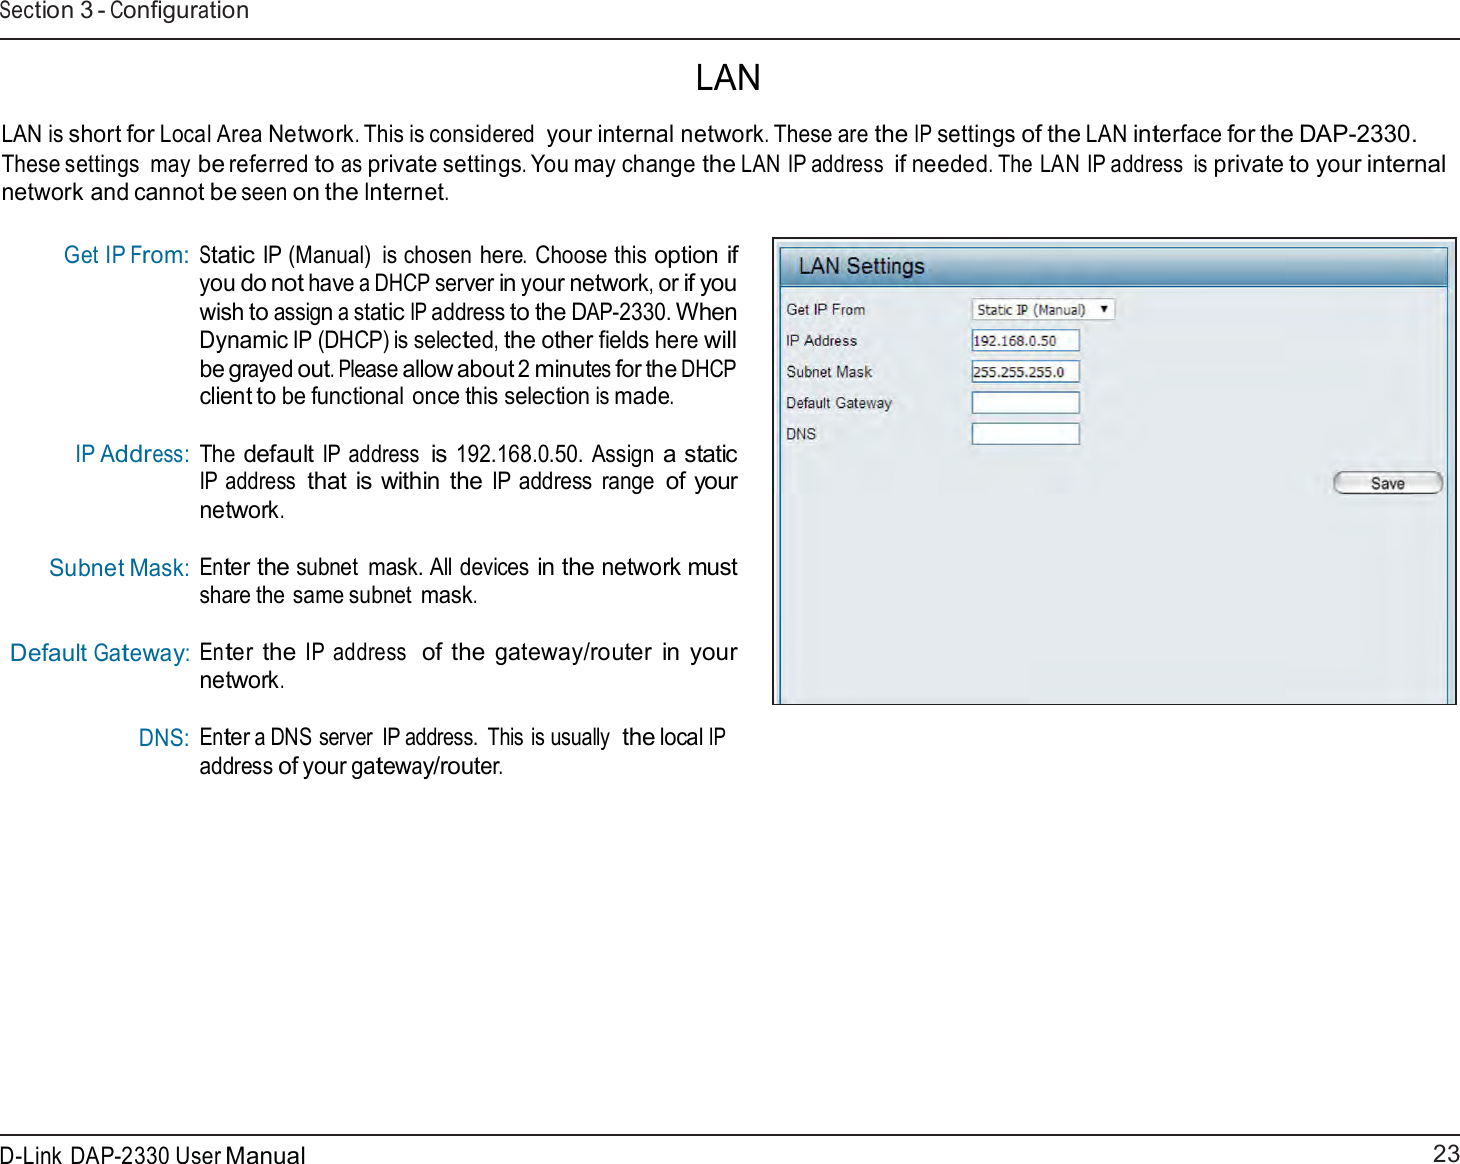 23 D-Link DAP-2330 User ManualSection 3 - Configuration    LAN  LAN is short for Local Area Network. This is considered your internal network. These are the IP settings of the LAN interface for the DAP-2330. These settings  may be referred to as private settings. You may change the LAN IP address if needed. The LAN IP address  is private to your internal network and cannot be seen on the Internet.   Get IP From:         IP Address:     Subnet Mask: Default Gateway: DNS: Static IP (Manual)  is chosen here. Choose this option if you do not have a DHCP server in your network, or if you wish to assign a static IP address to the DAP-2330. When Dynamic IP (DHCP) is selected, the other fields here will be grayed out. Please allow about 2 minutes for the DHCP client to be functional once this selection is made.  The default IP address is 192.168.0.50. Assign a static IP address that is within the IP address  range of your network.  Enter the subnet  mask. All devices in the network must share the same subnet mask.  Enter the IP address  of the gateway/router in your network.  Enter a DNS server  IP address.  This is usually  the local IP address of your gateway/router. 